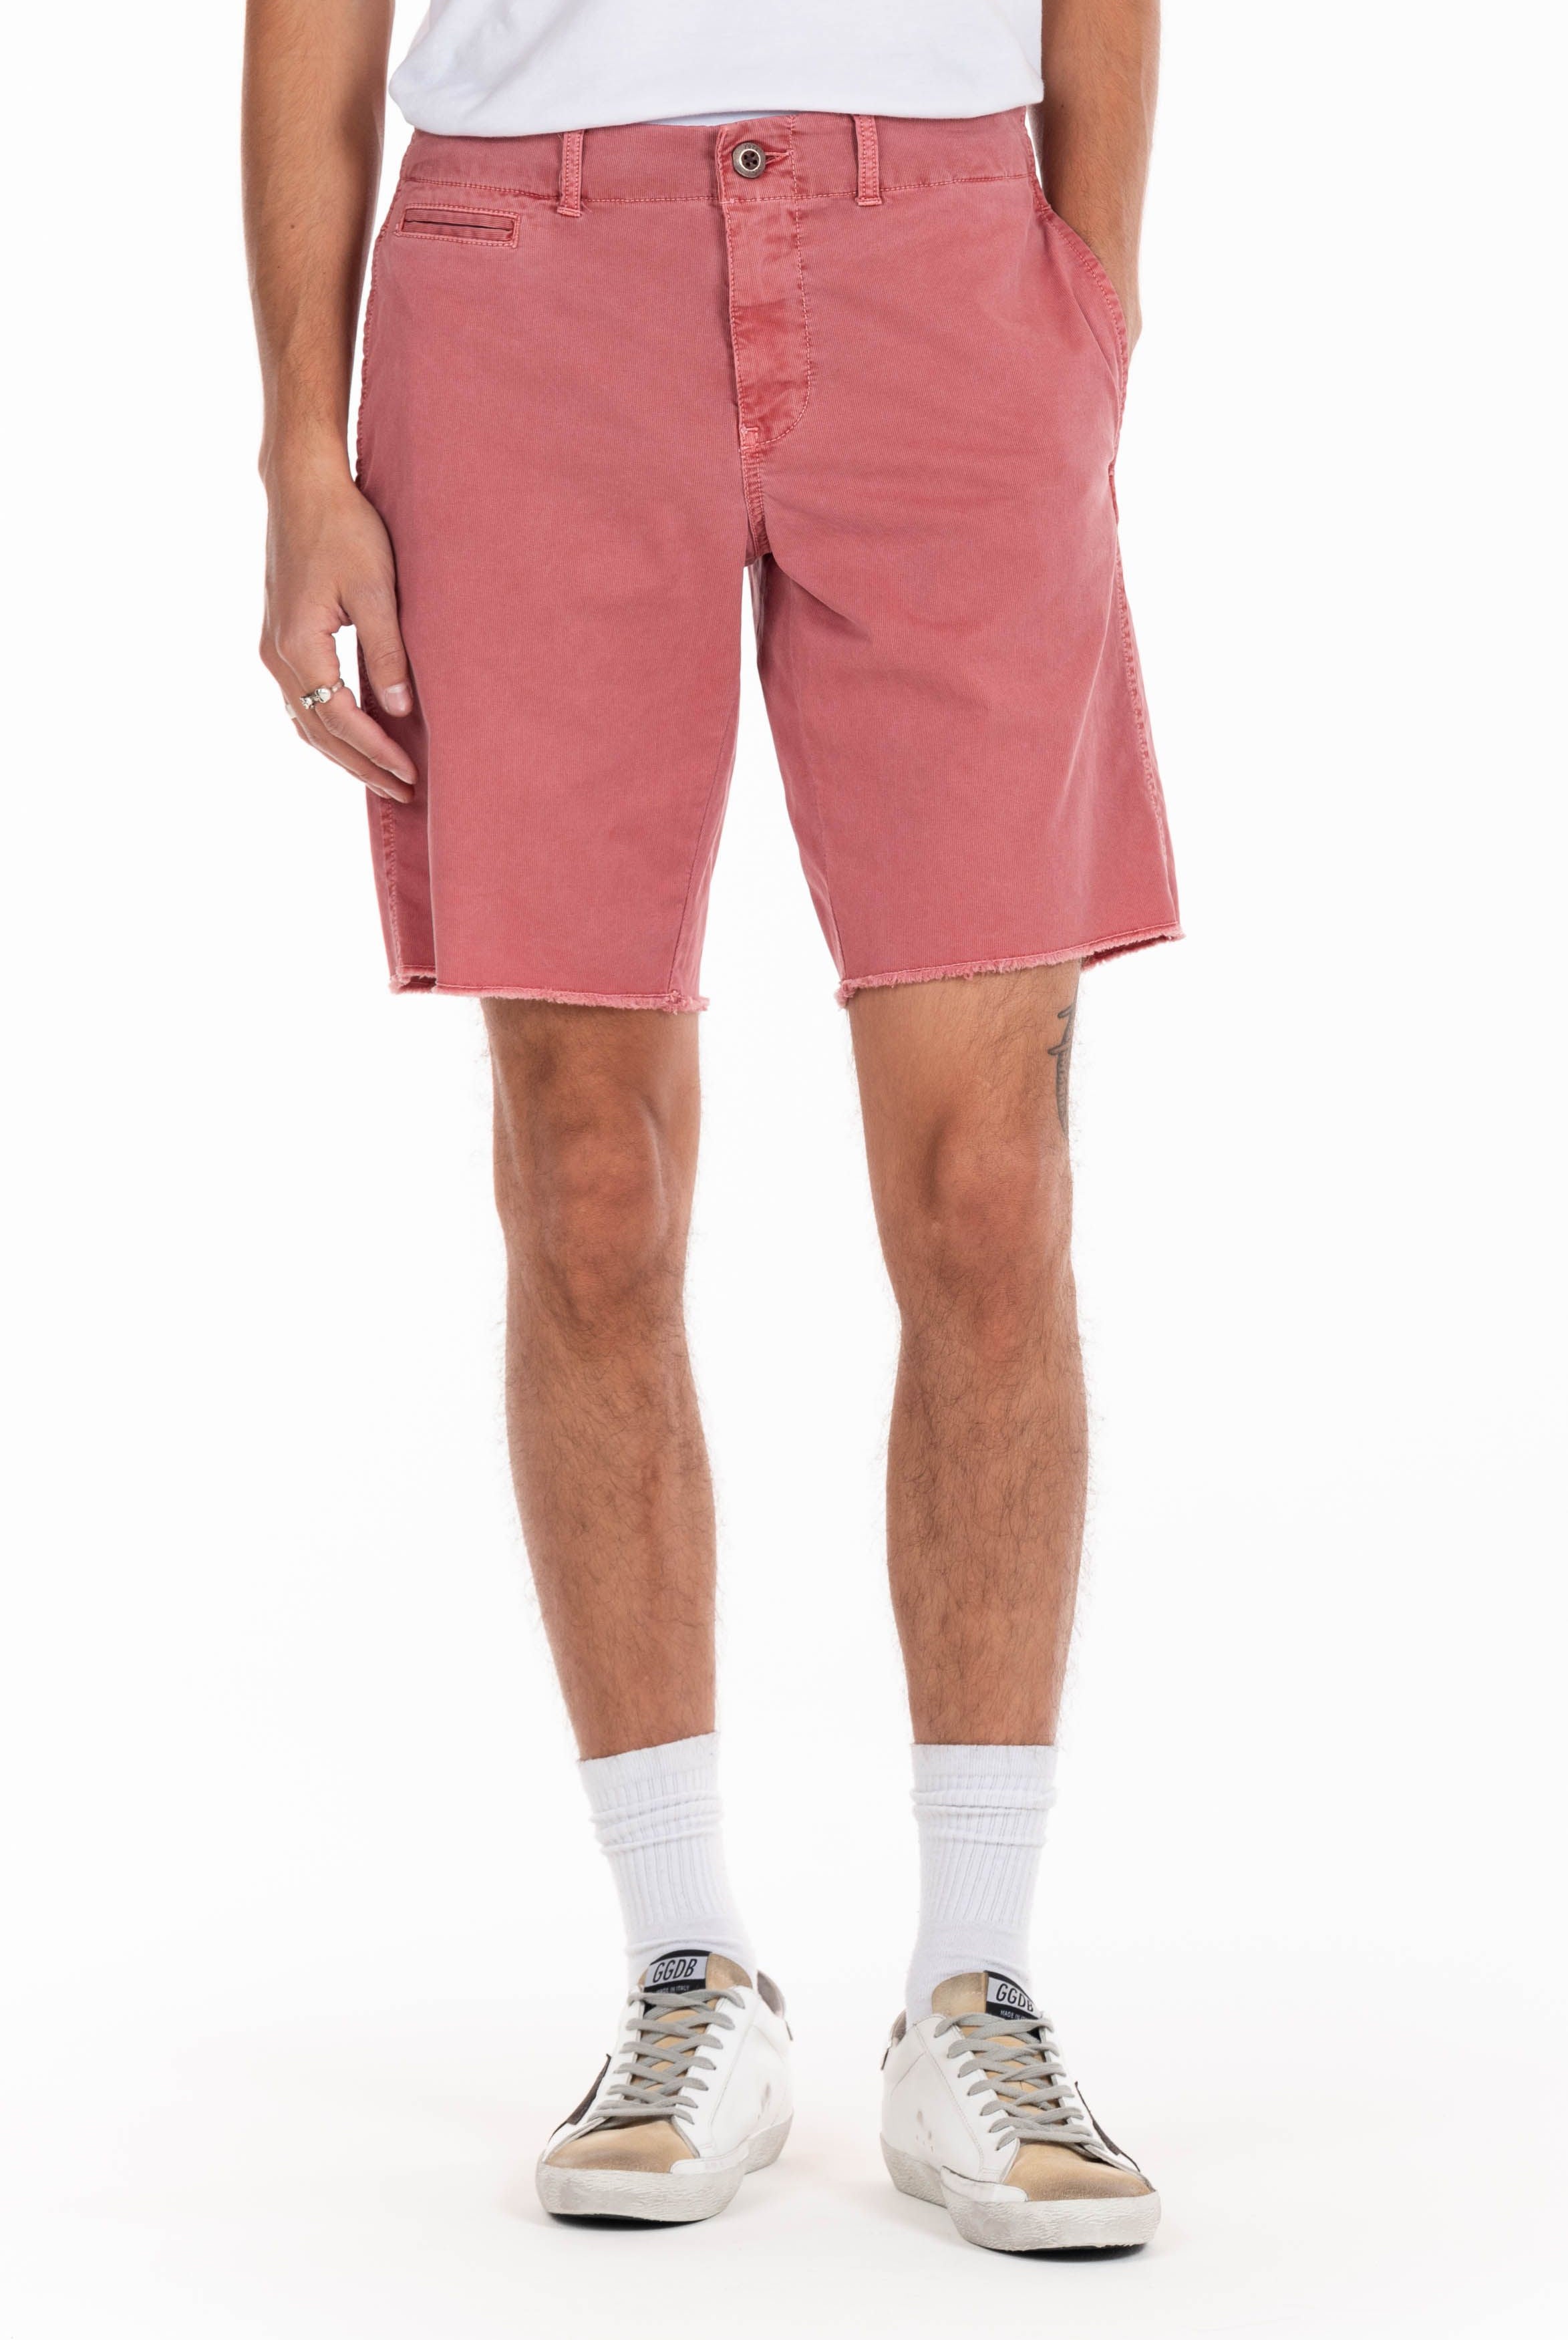 Rockland Chino Shorts-Men's Bottoms-Vixen Collection, Day Spa and Women's Boutique Located in Seattle, Washington